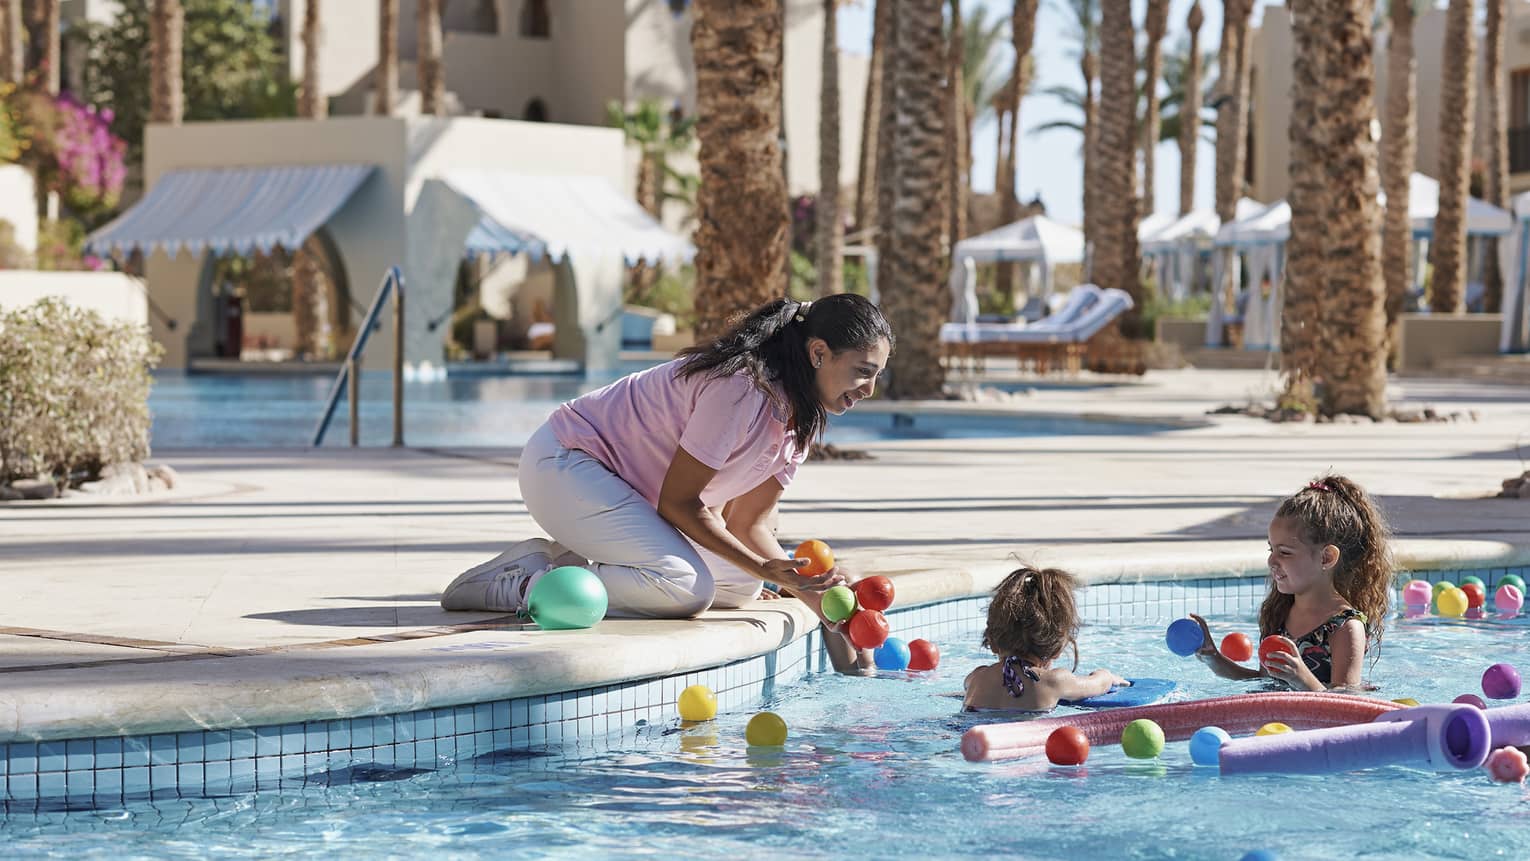 Woman supervising two children in pool with pool toys